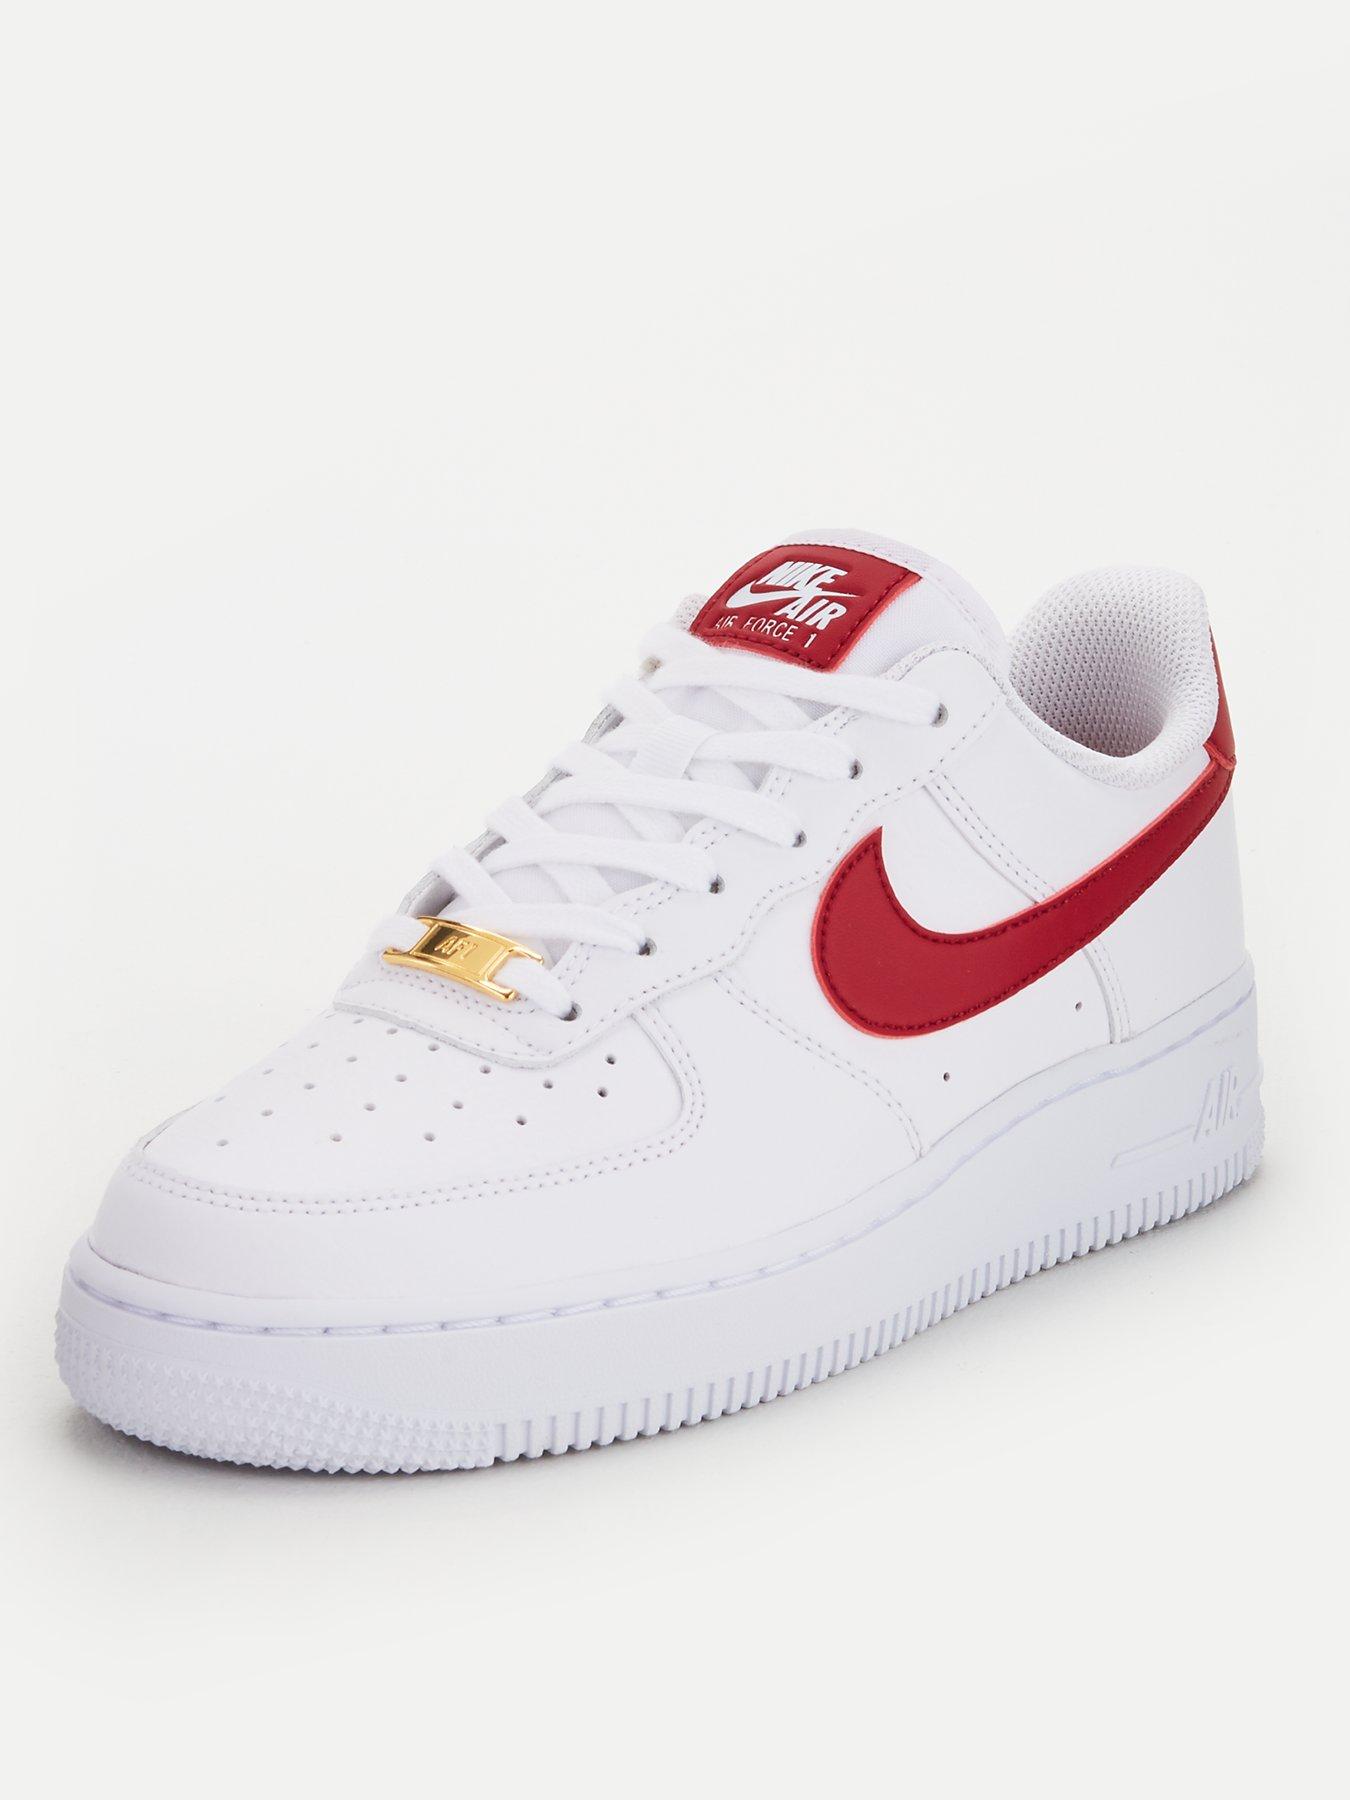 Nike Air Force 1 '07 - White/Red 